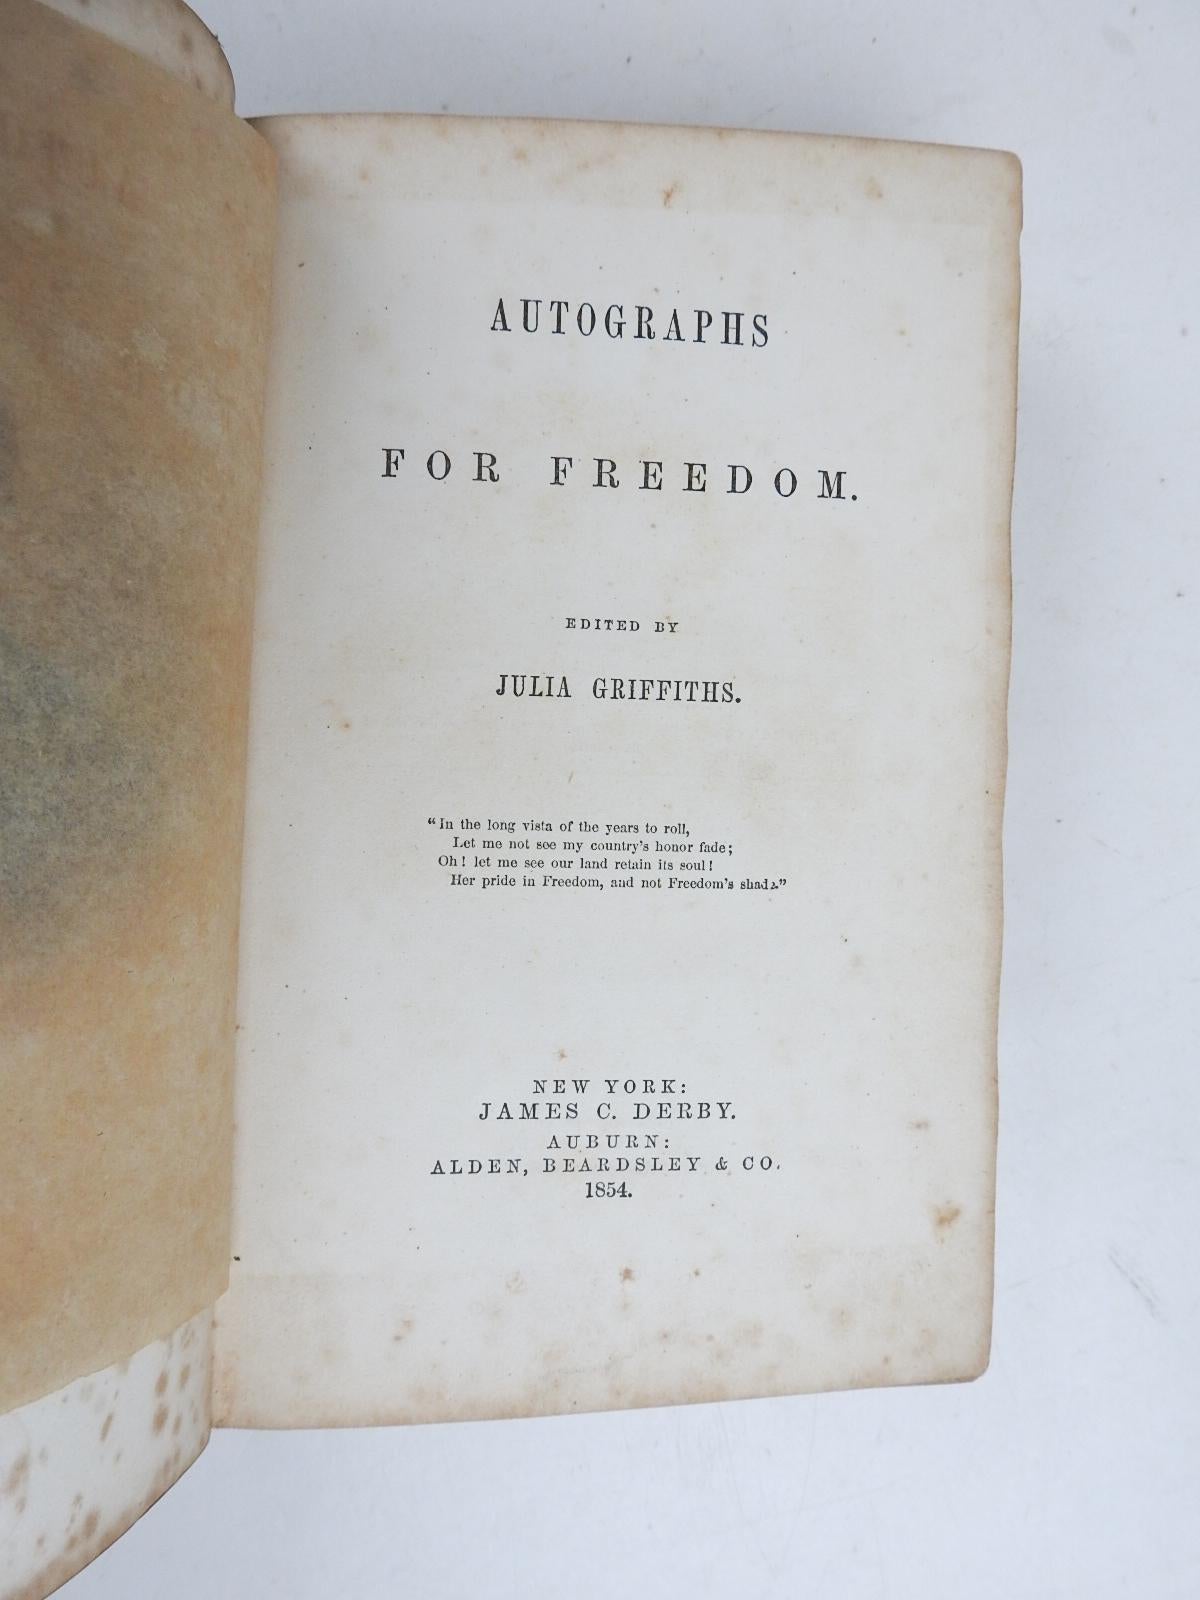 Autographs for Freedom edited by Griffiths, Julia.  Published by Alden, Beardsley & Co; Wanzer, Beardsley & Co, Auburn 1854.  A collection of  Anti-Slavery Testimonies  from the Rochester Anti-Slavery Society with contributions from the likes of